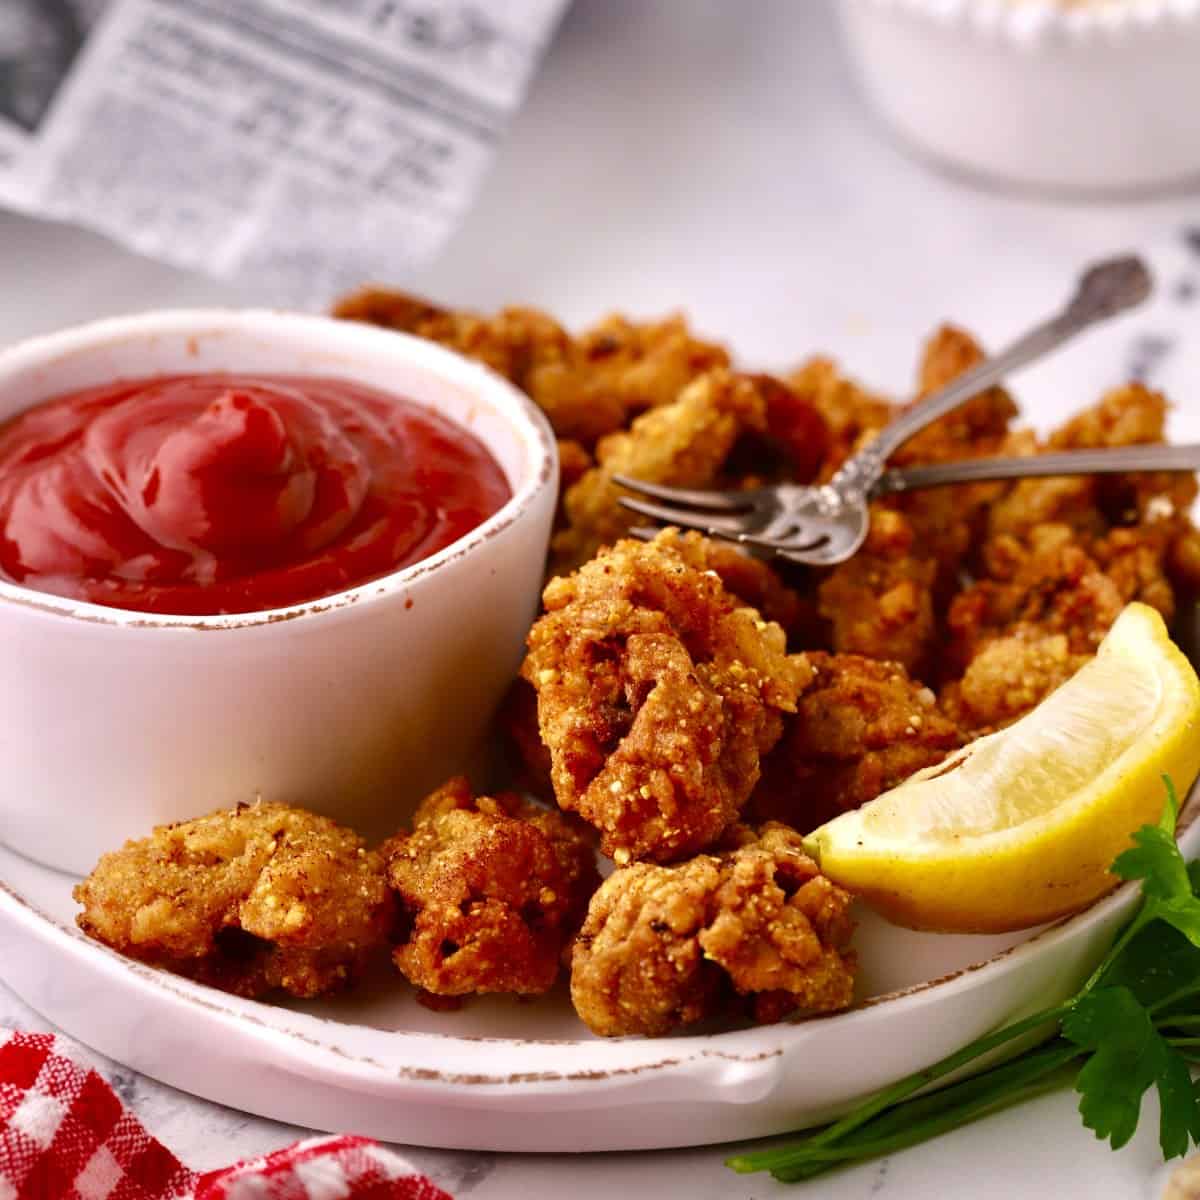 https://www.gritsandpinecones.com/wp-content/uploads/2023/03/fried-oysters-final-featured.jpg